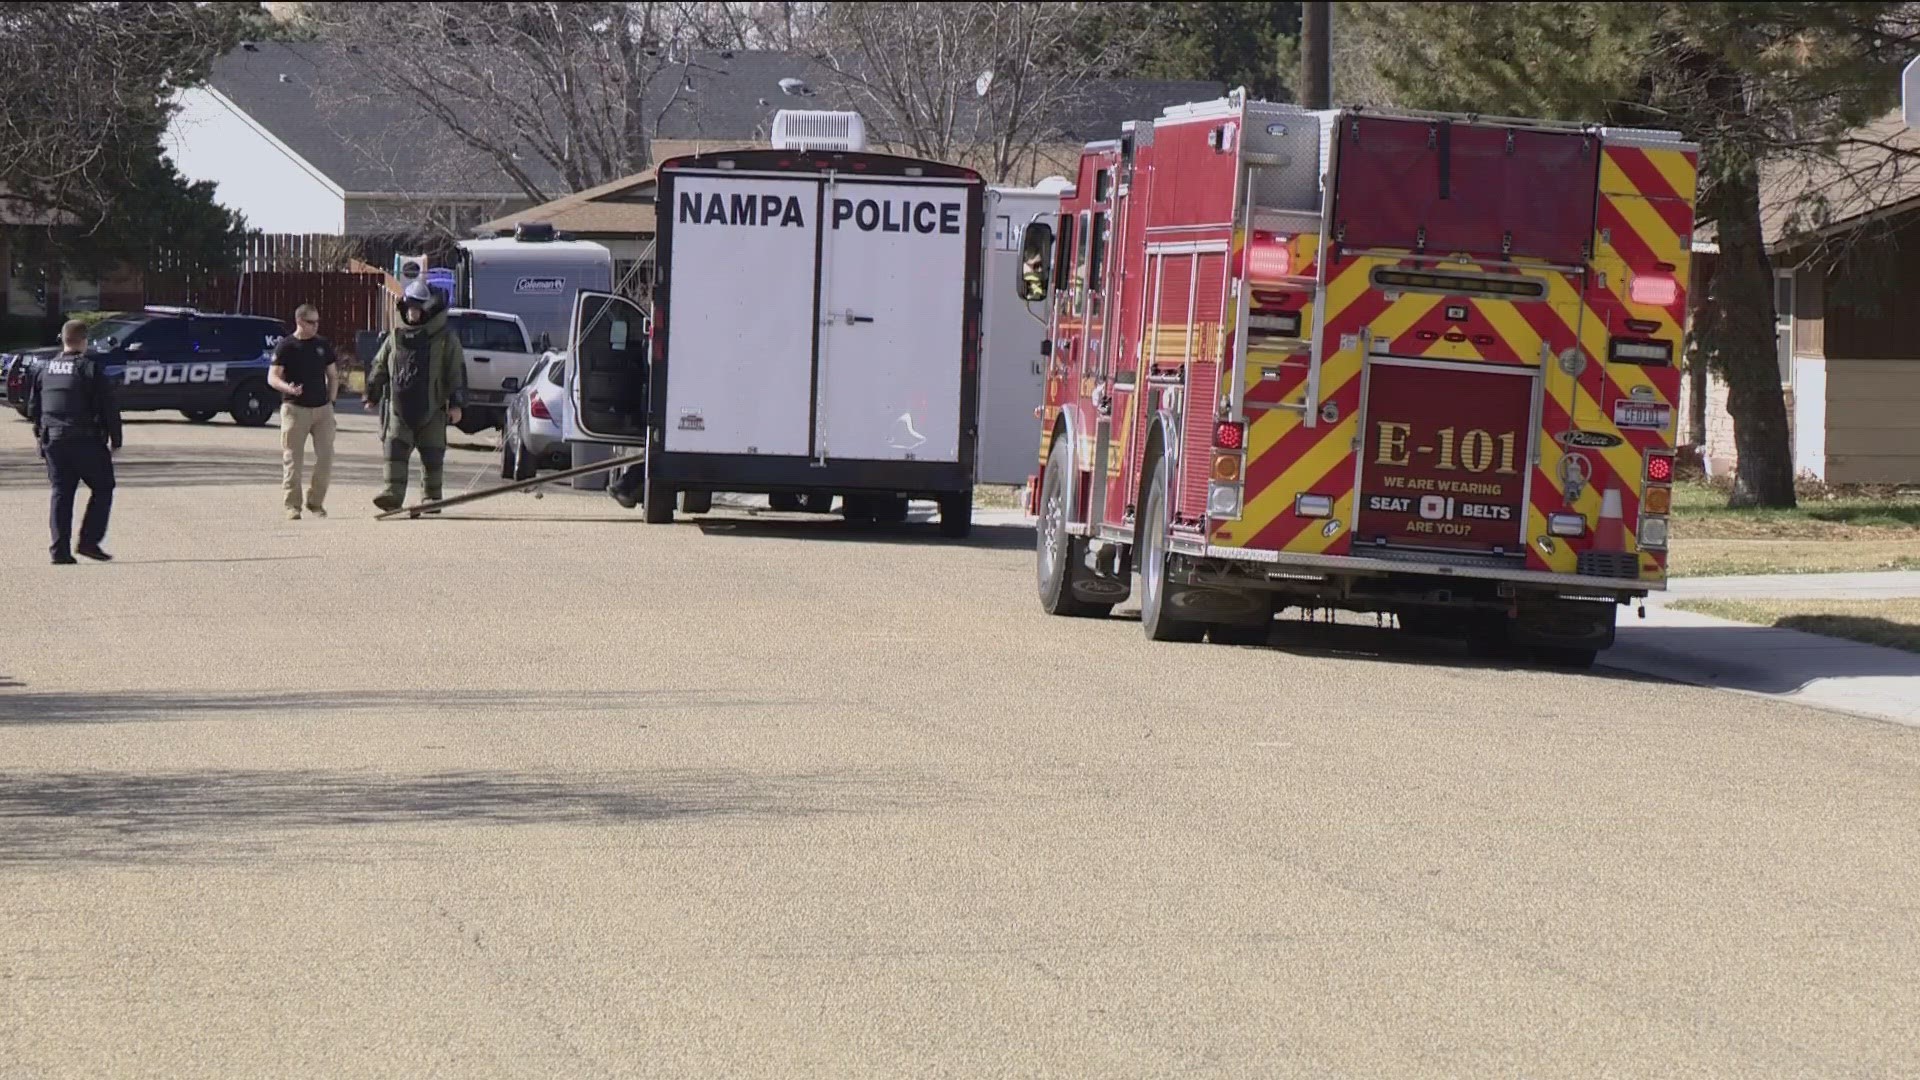 Nampa's bomb squad was dispatched to a Caldwell home, forcing neighbors to evacuate as a safety precaution.